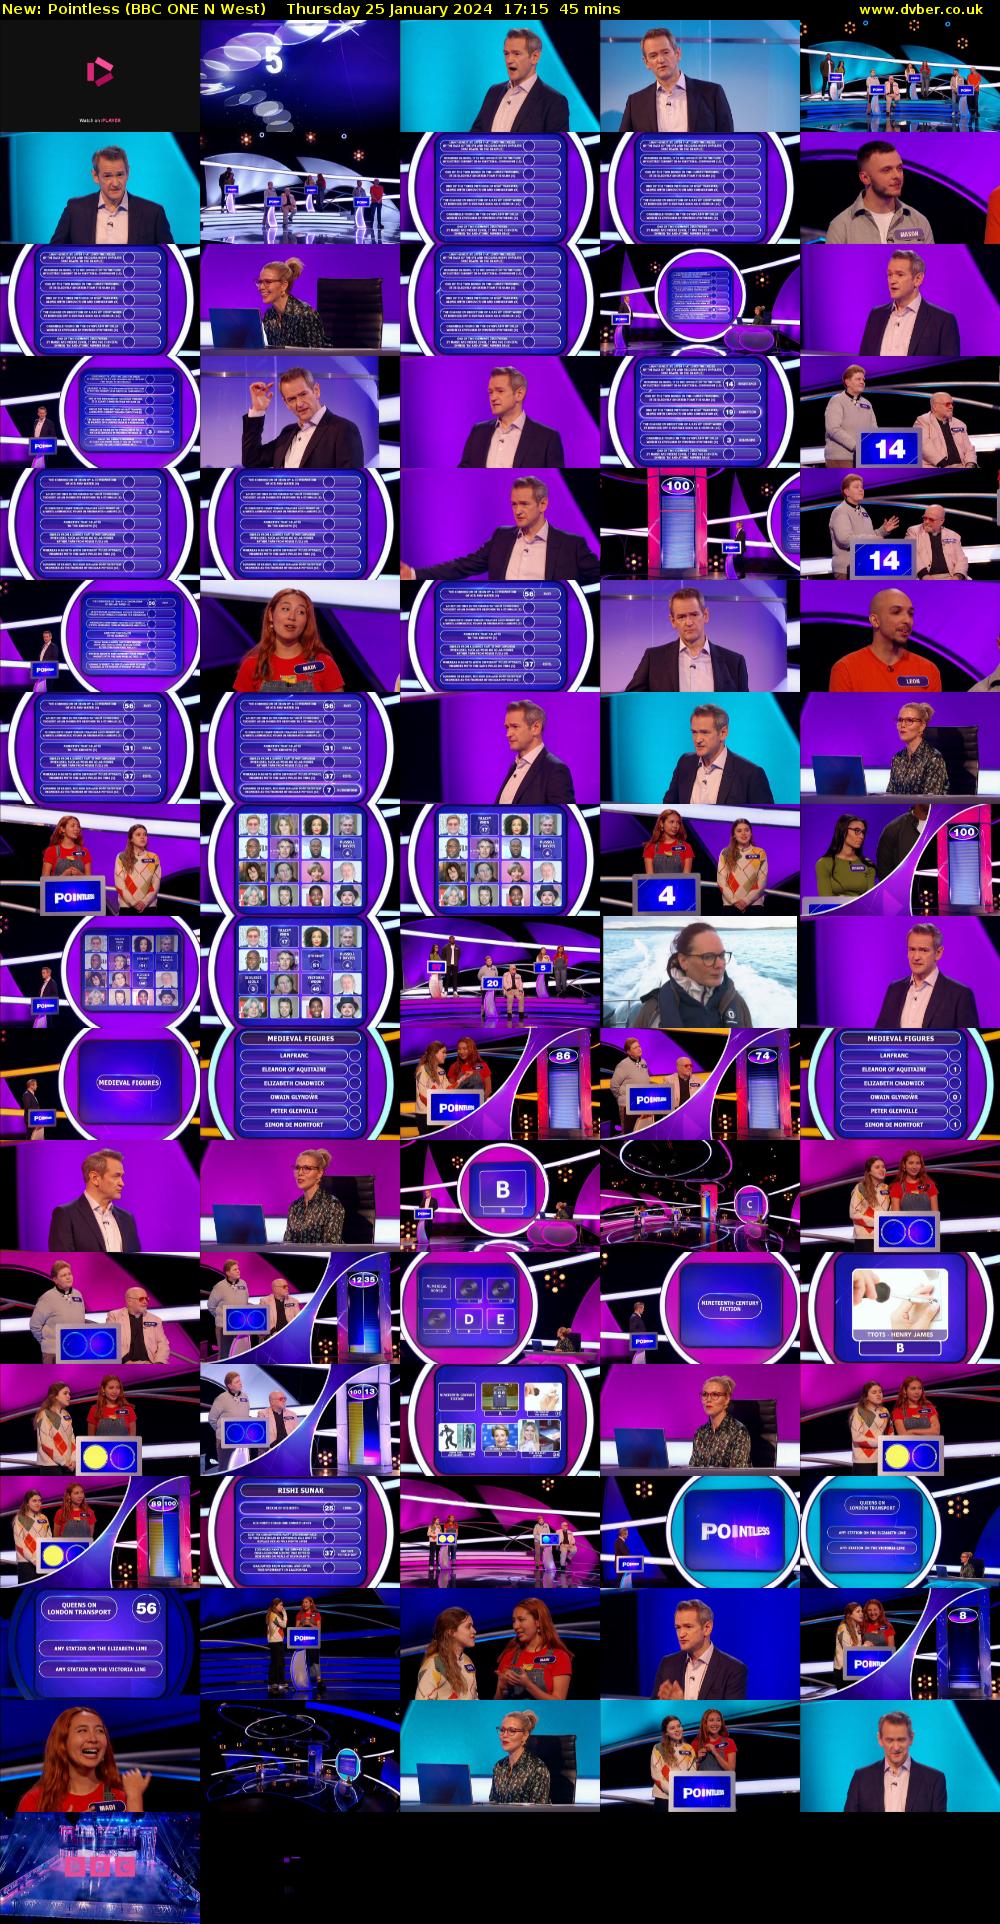 Pointless (BBC ONE N West) Thursday 25 January 2024 17:15 - 18:00